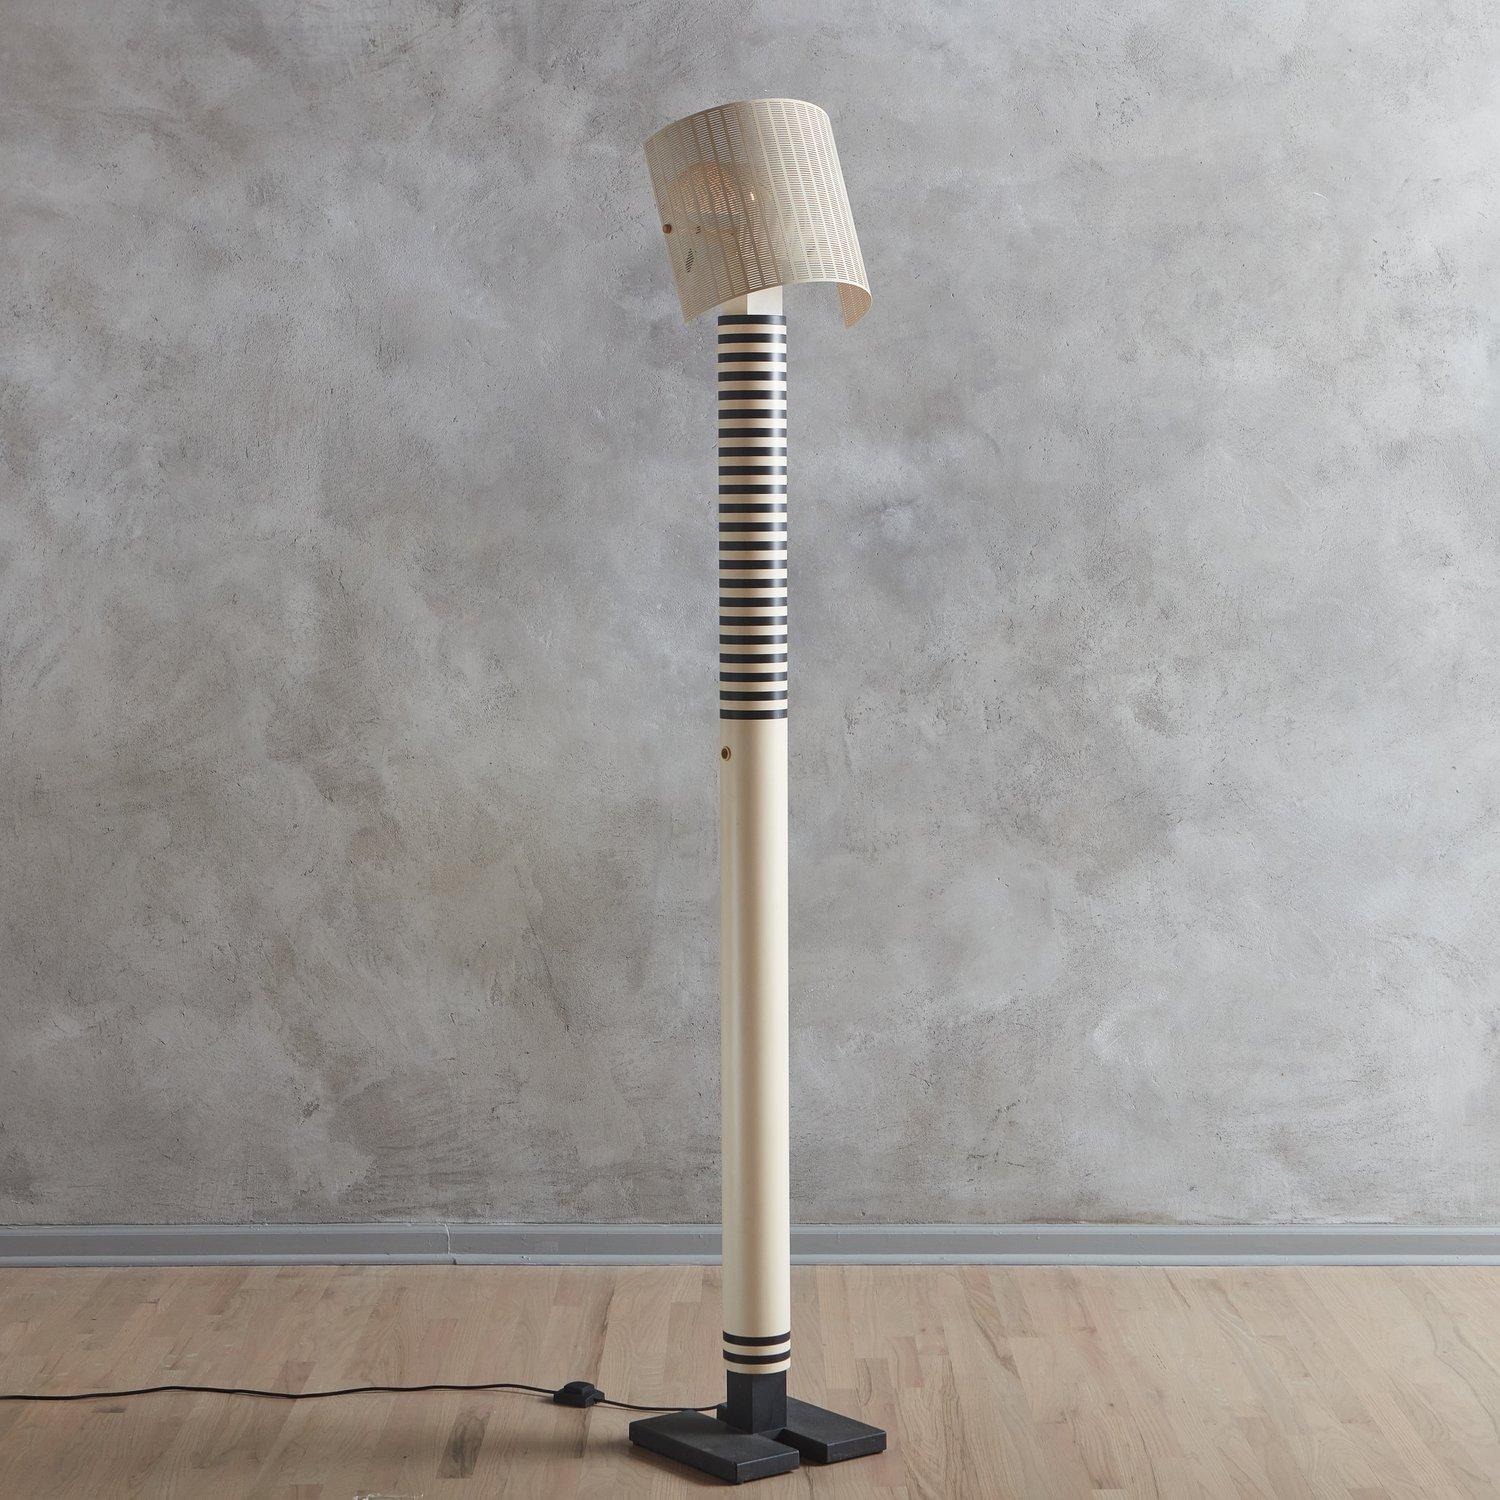 The “Shogun” Lamp by Swiss Architect Mario Botta for Artemide designed in 1986 as part of their “Masters” Collection. A true icon of design, the Shogun lamp is now on display at the Metropolitan Museum in New York. This floor lamp features an